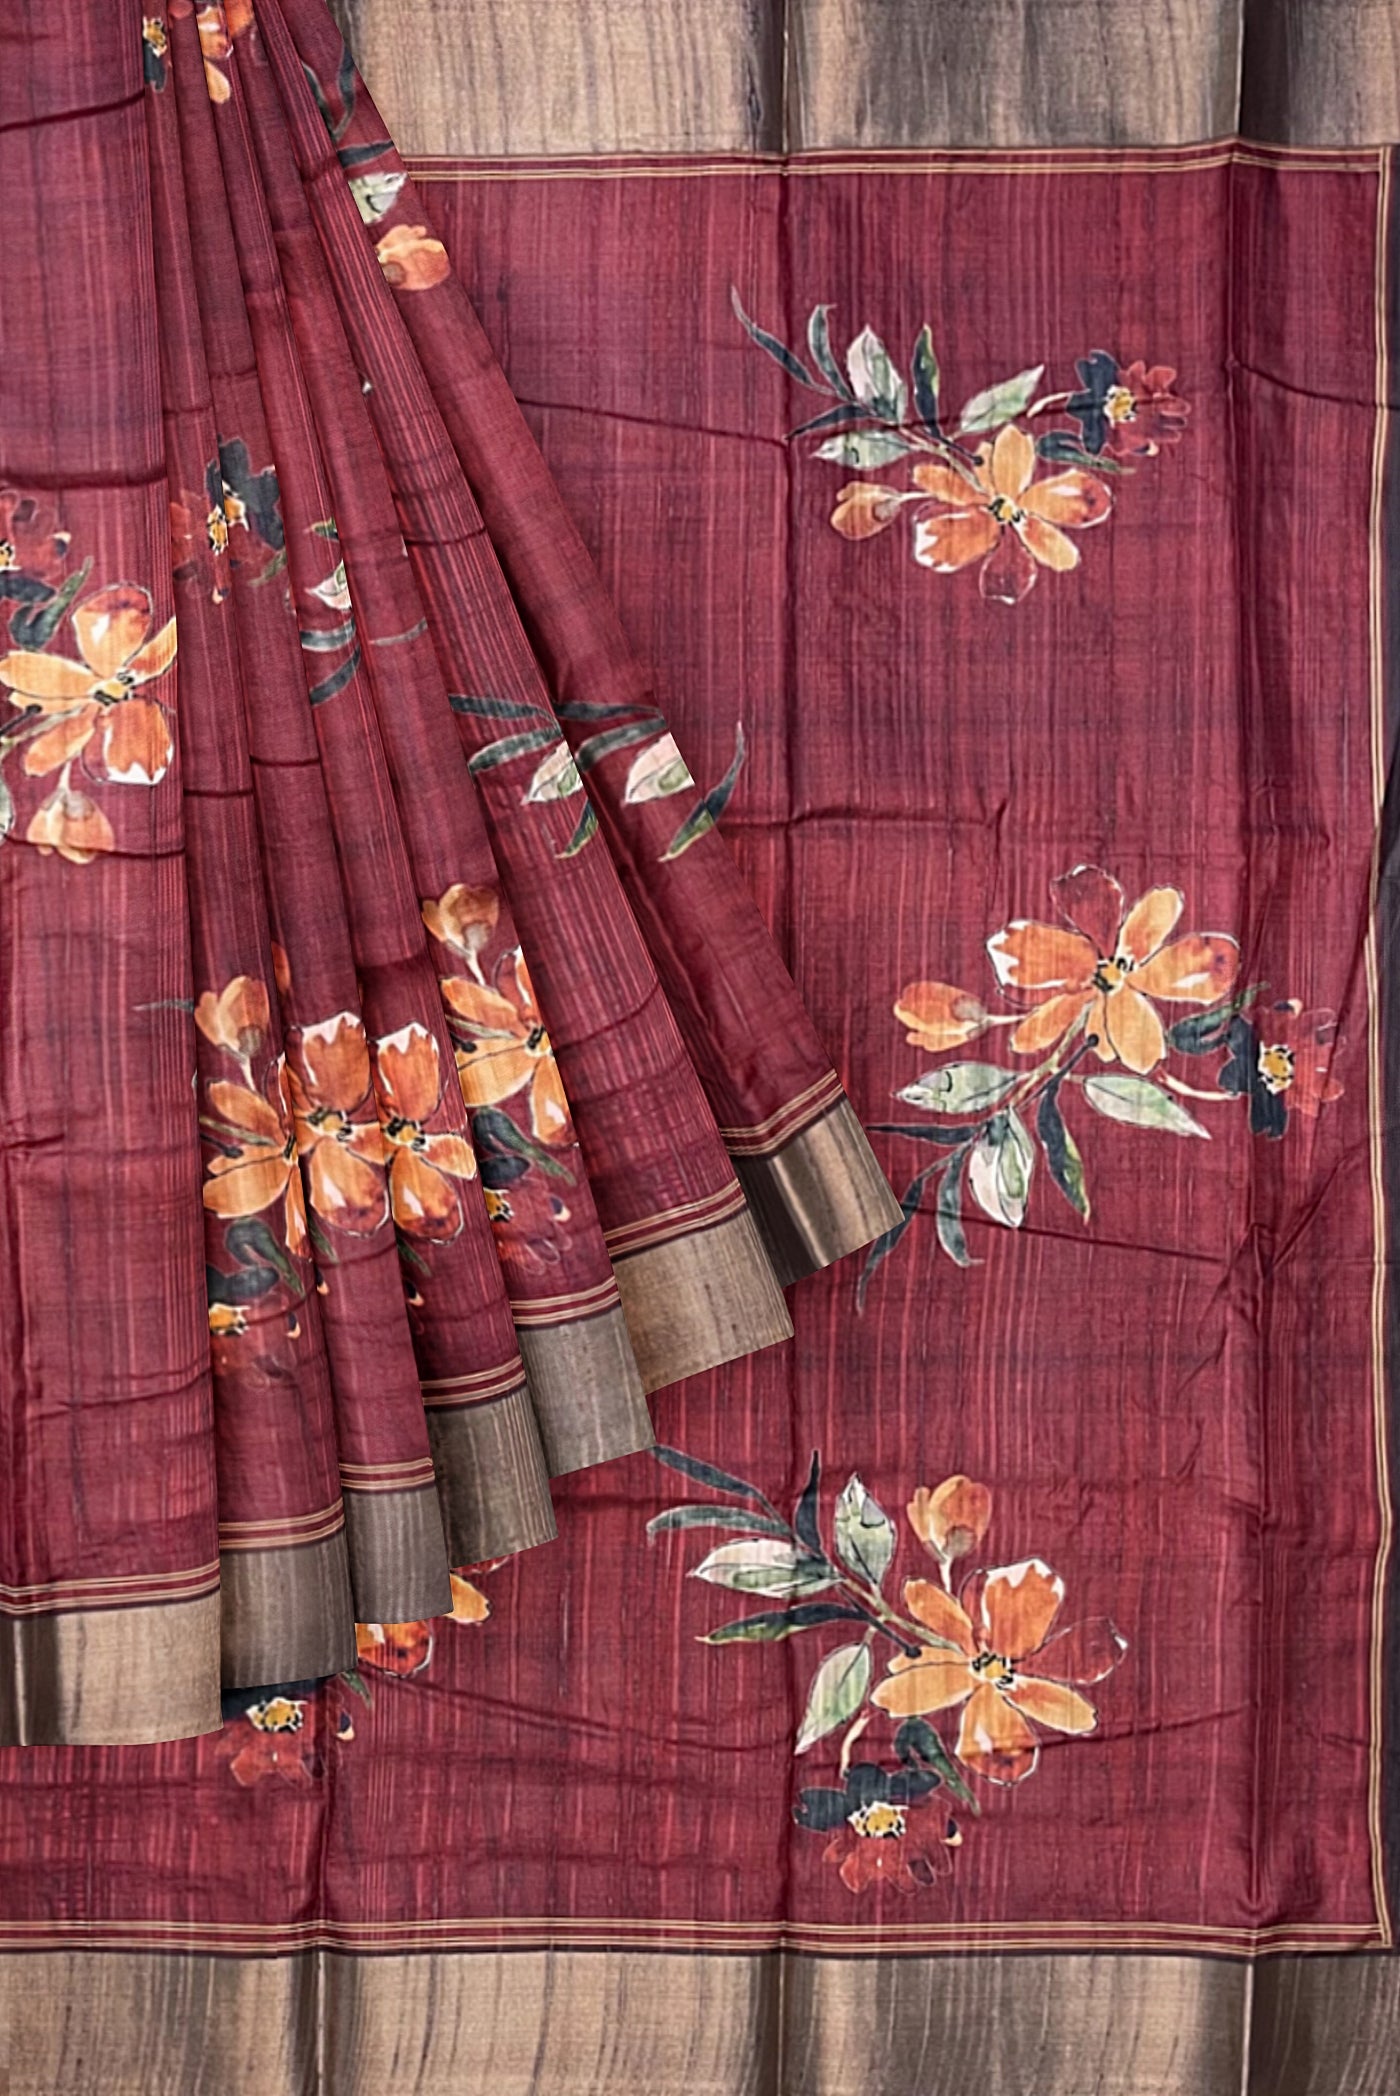 Maroon Office Wear Saree With Floral Pattern